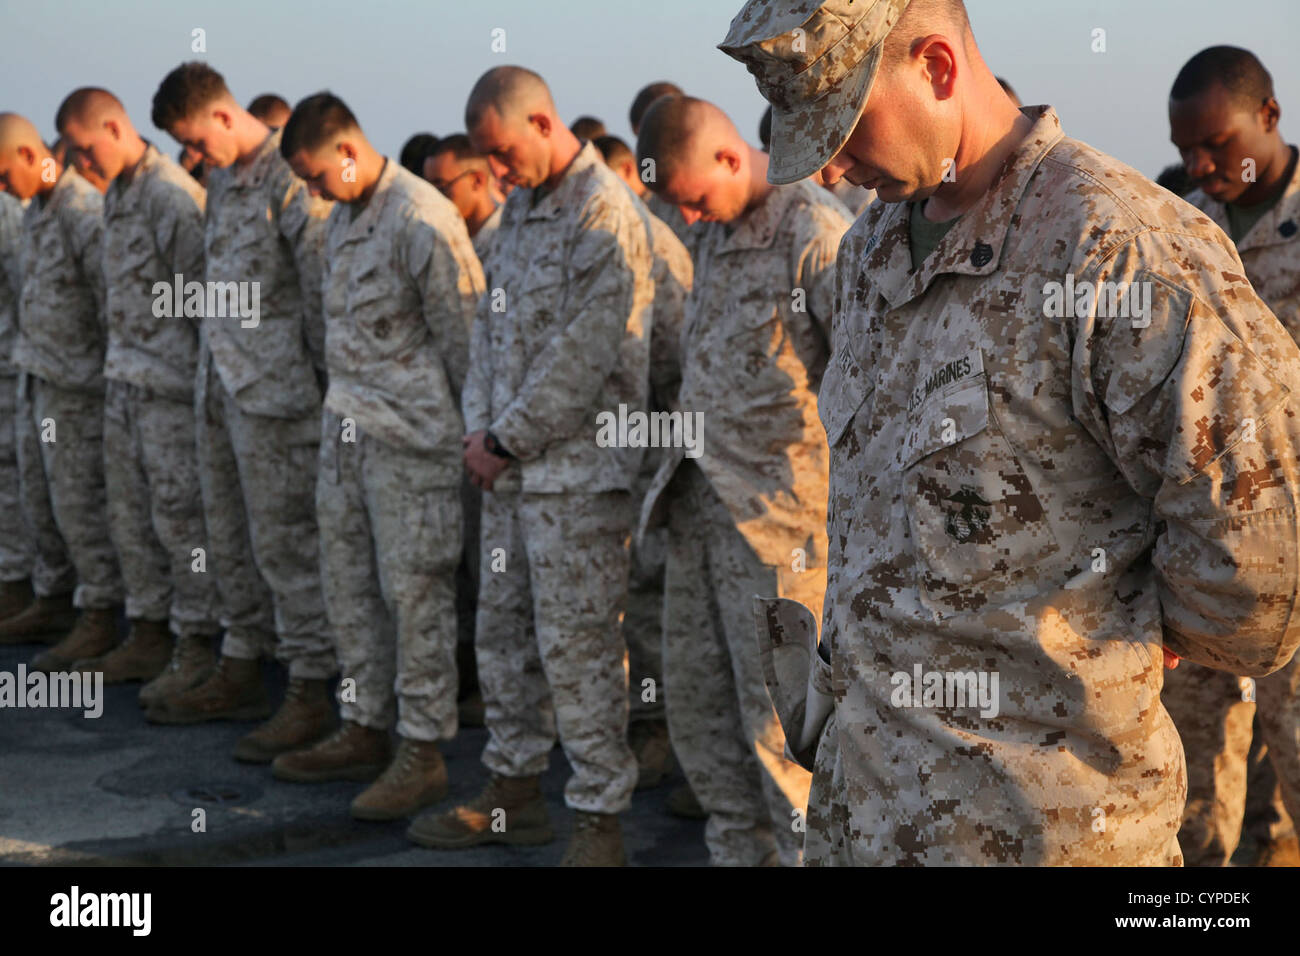 Marines from the 15th Marine Expeditionary Unit bow their heads in prayer during an early Marine Corps Birthday celebration on the flight deck of the USS Rushmore, Nov. 7. The 15th MEU is deployed as part of the Peleliu Amphibious Ready Group as a theater Stock Photo